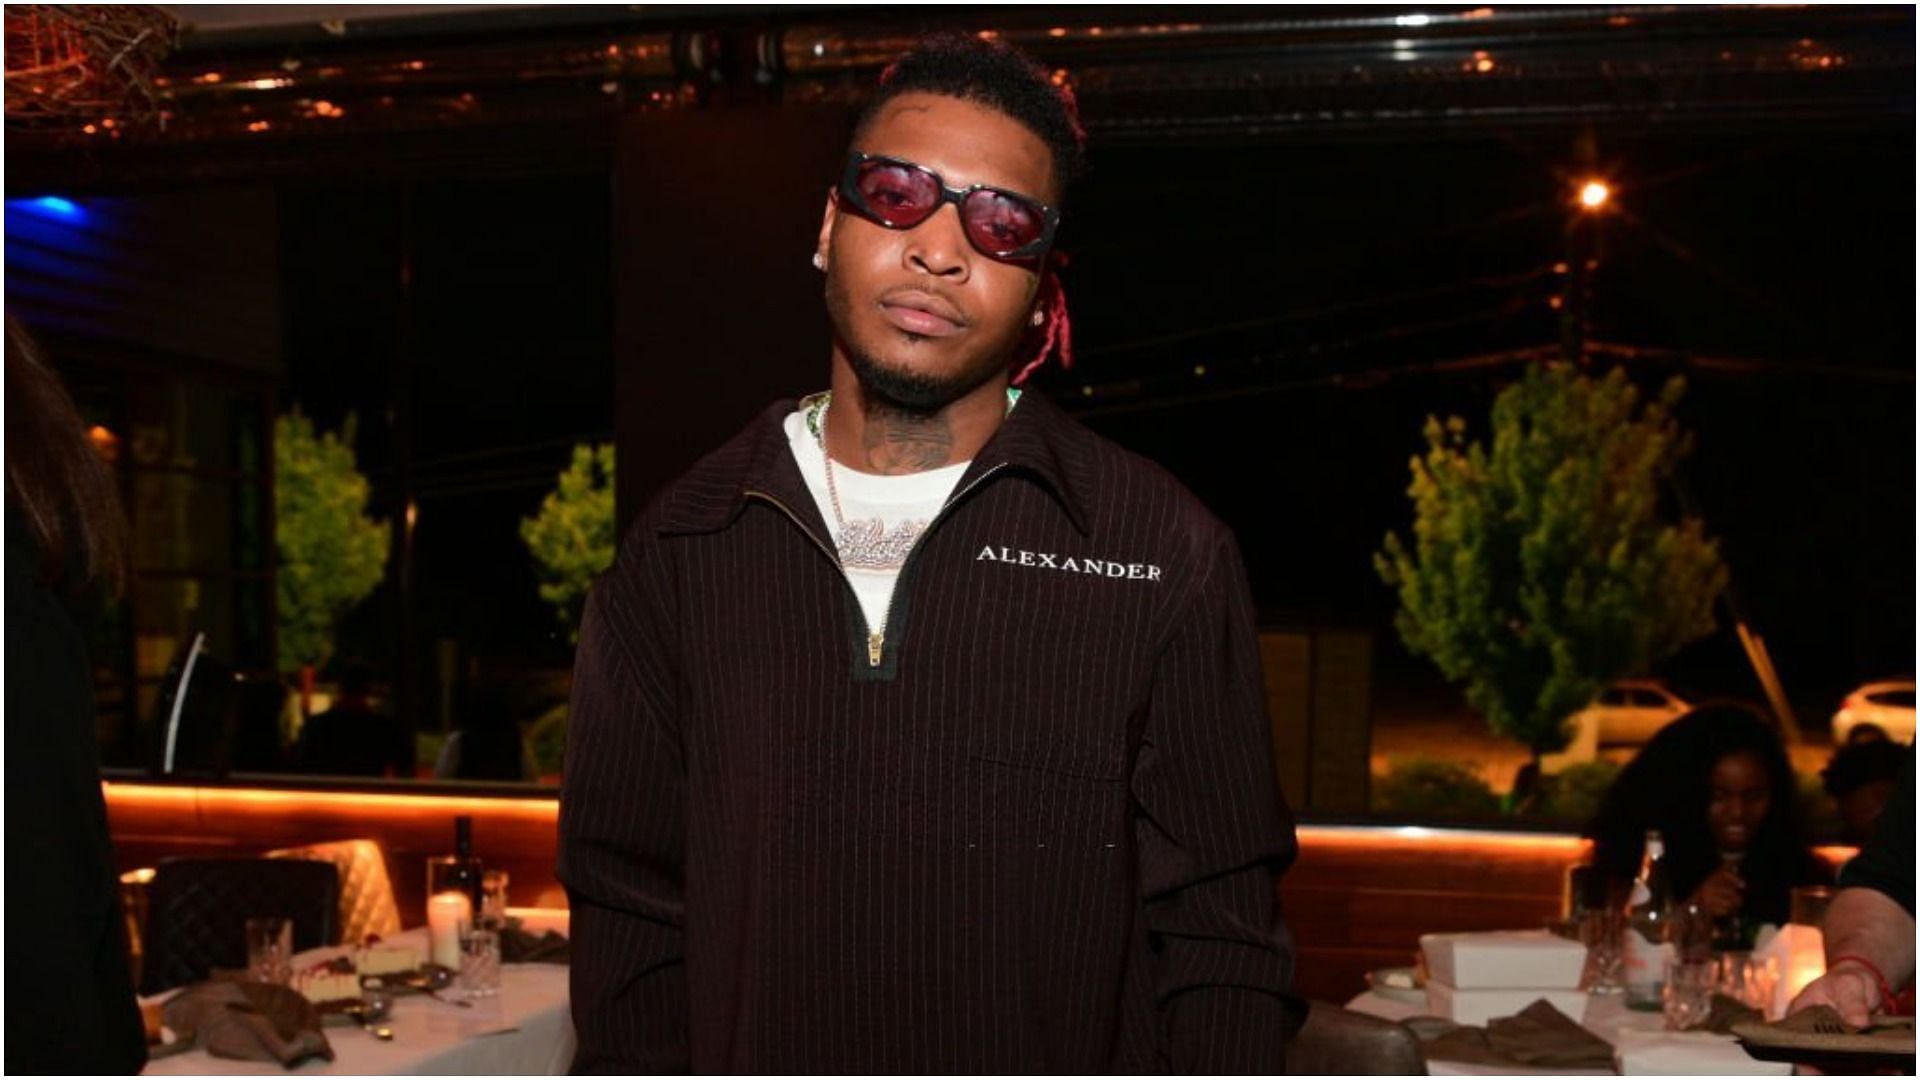 Lil Keed recently died at the age of 24 (Image via Prince Williams/Getty Images)